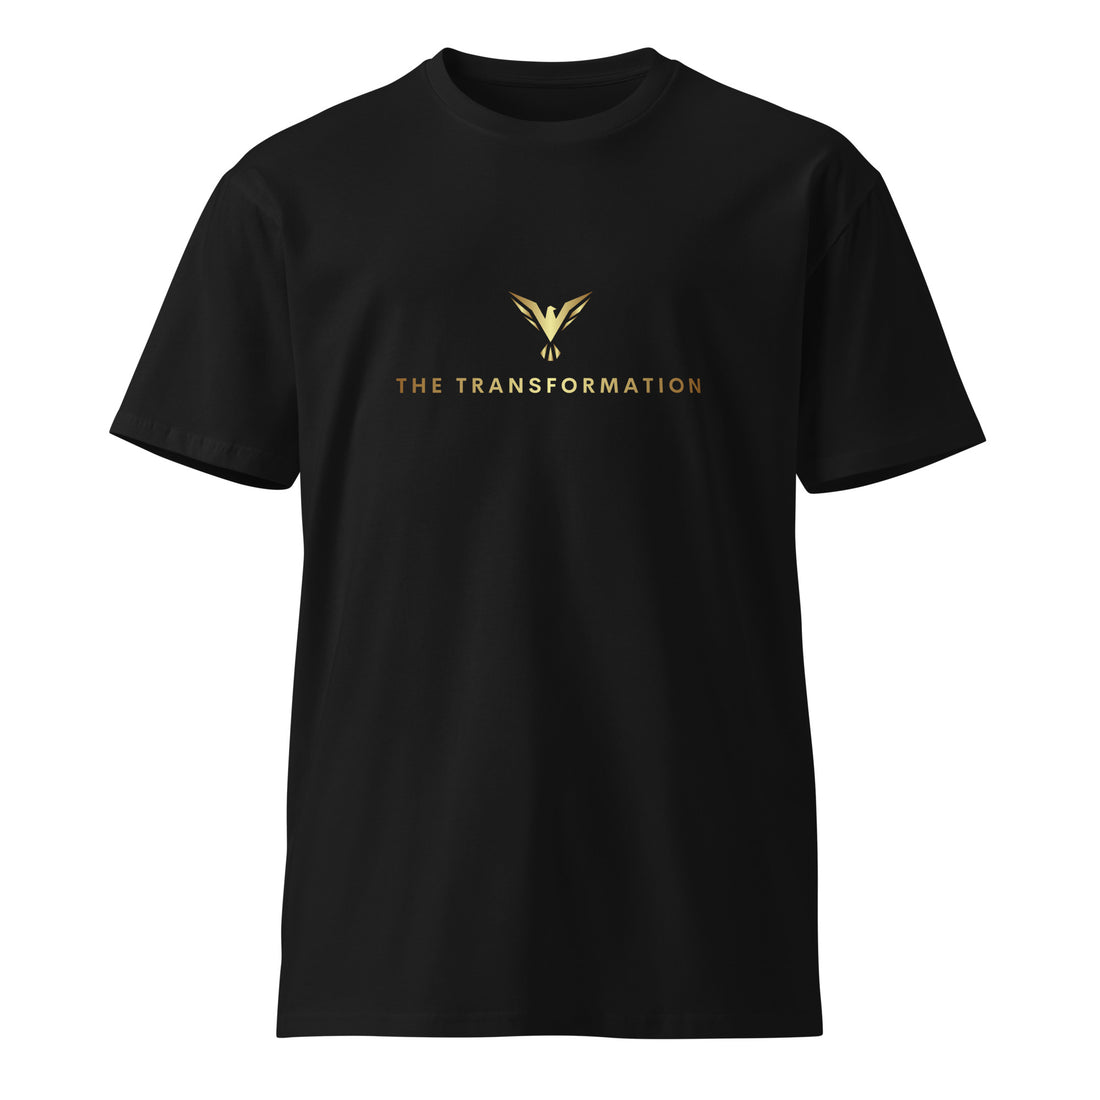 The Transformation Event - Unisex - T-shirt